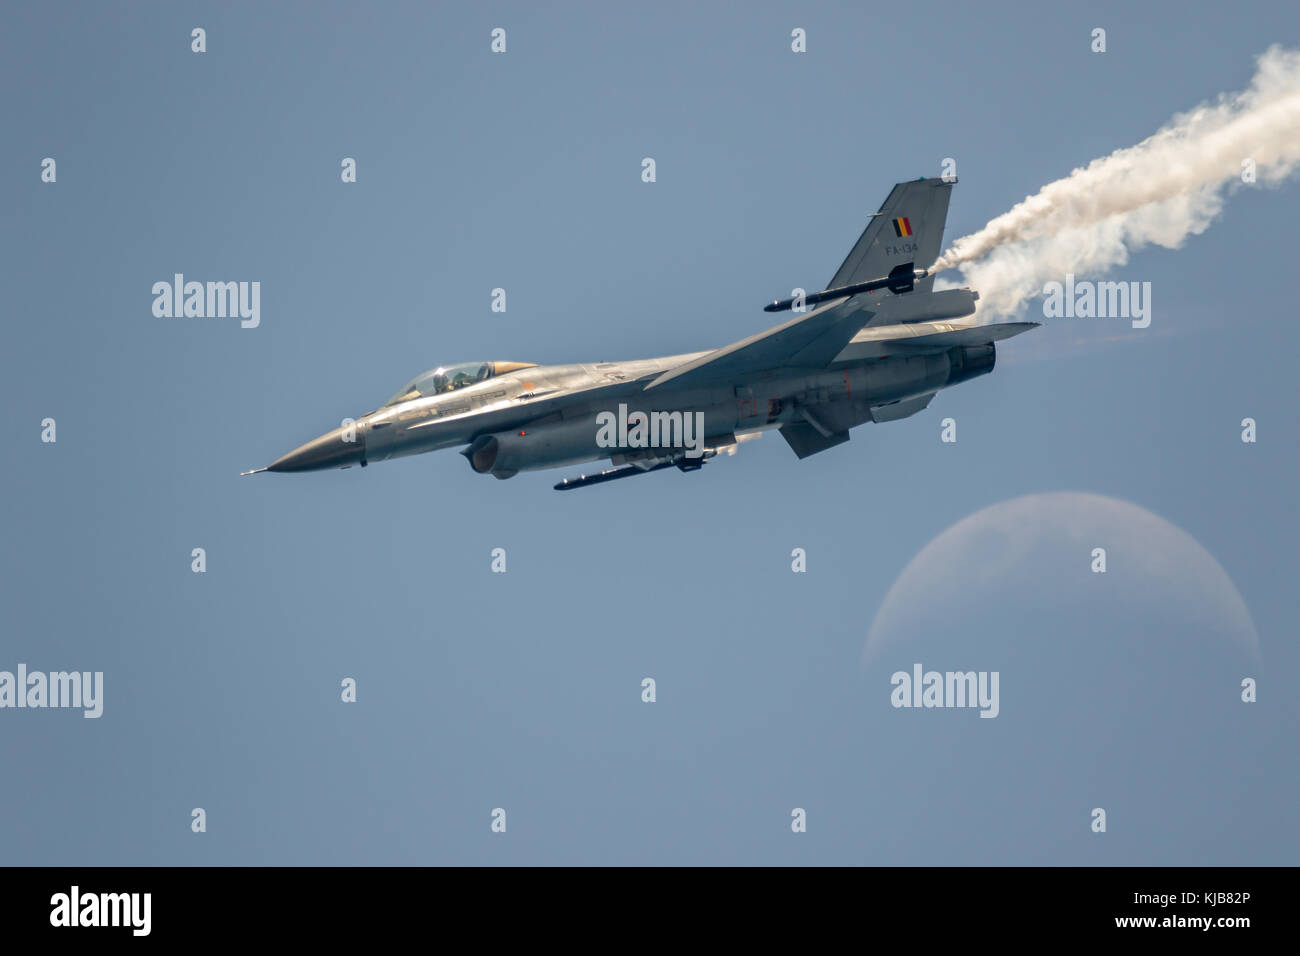 TORRE DEL MAR, MALAGA, SPAIN-JUL 28: Aircraft F-16 Belgian solo display taking part in a exhibition on the 2nd airshow of Torre del Mar on July 28, 20 Stock Photo